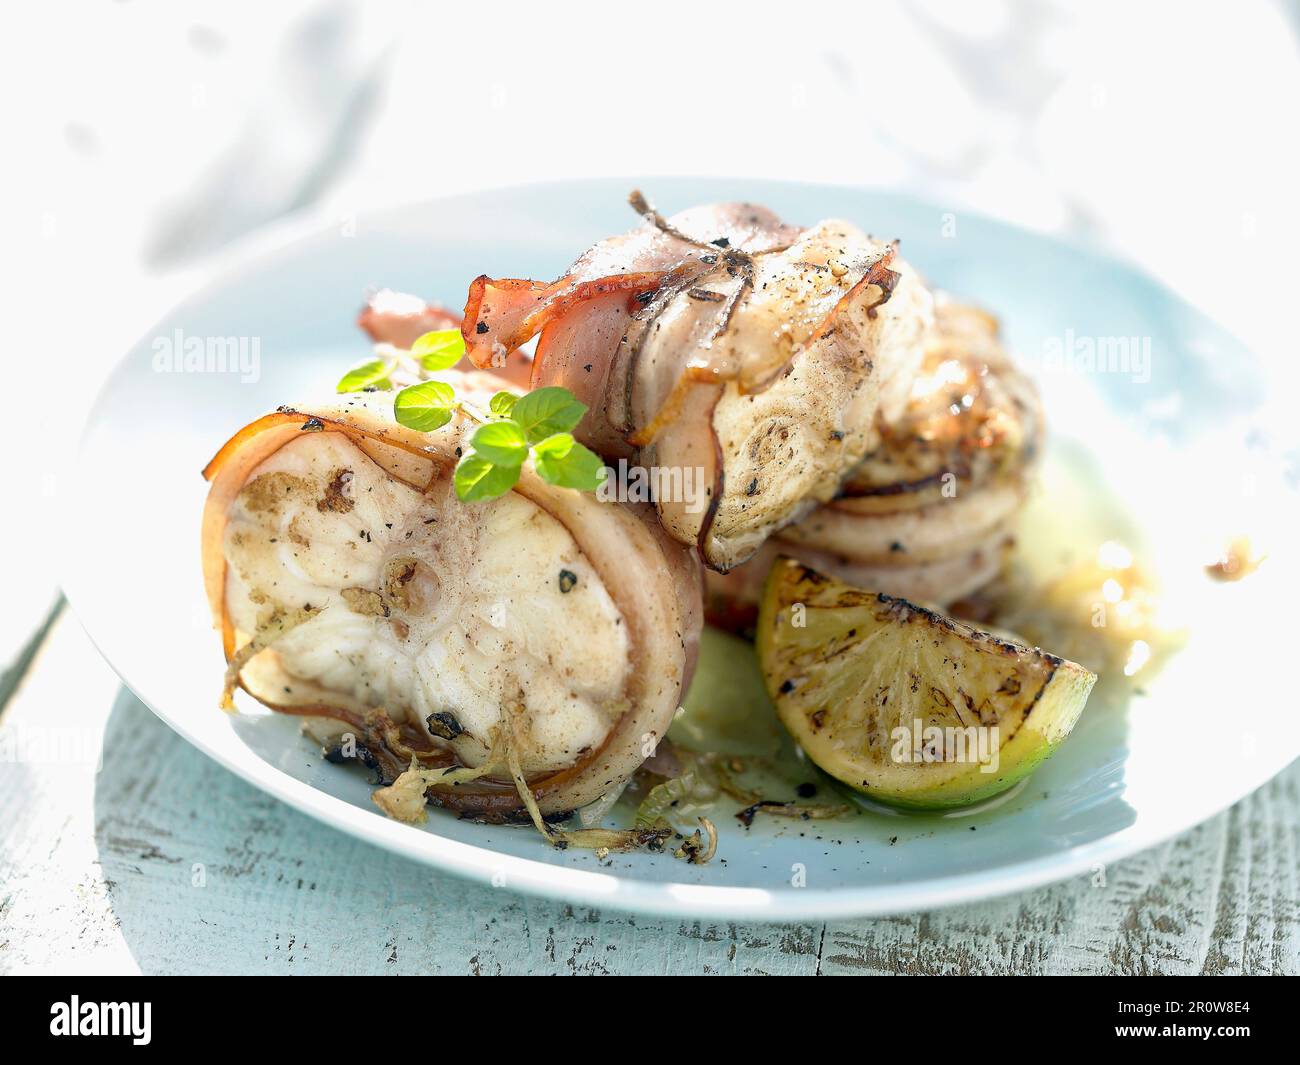 Monkfish wrapped in bacon with lemon Stock Photo